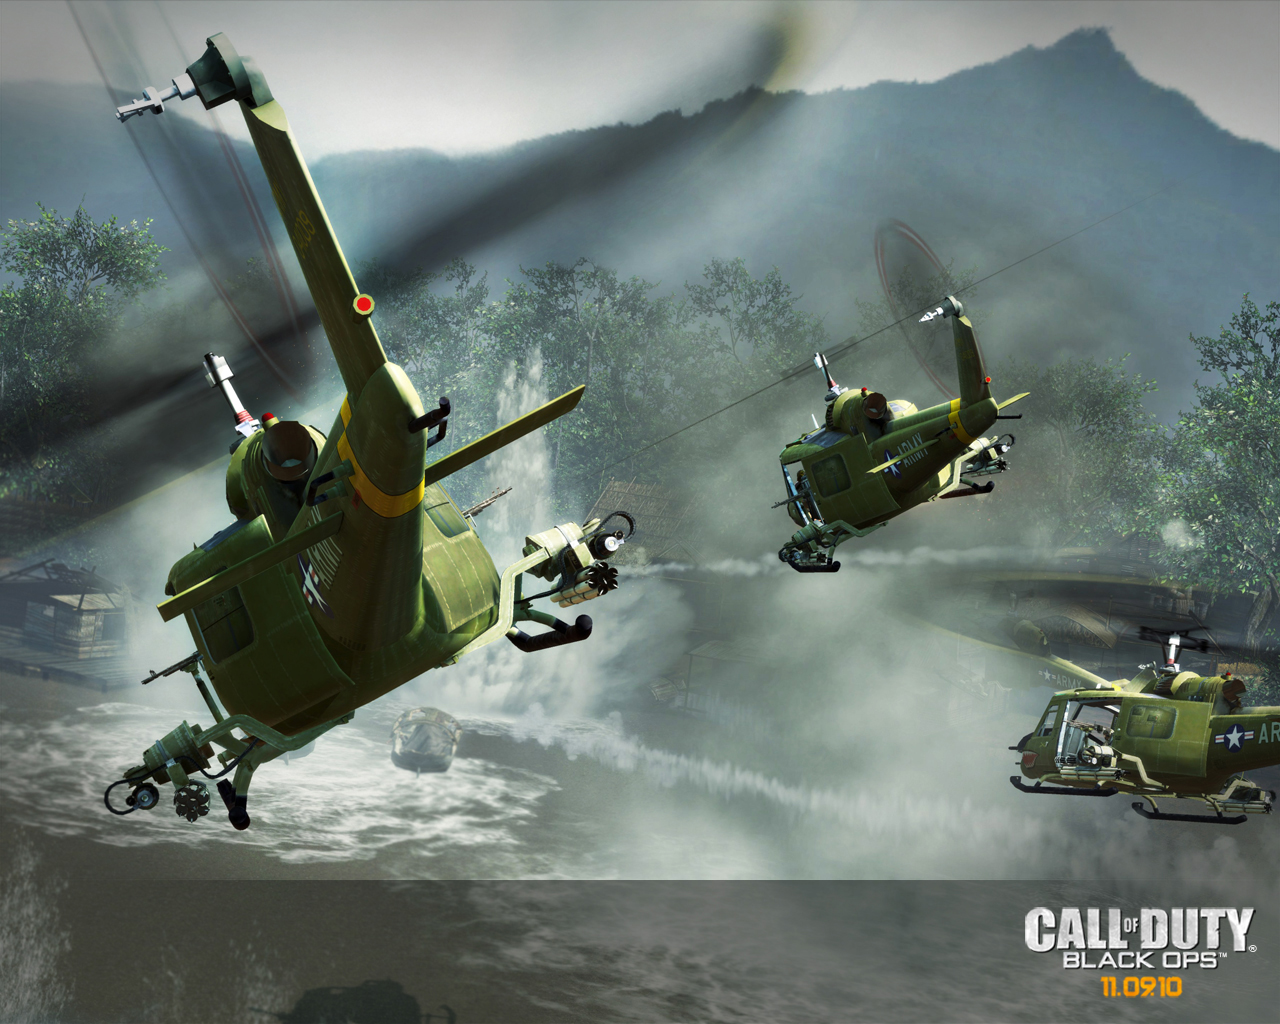 Call of duty black ops wallpapers